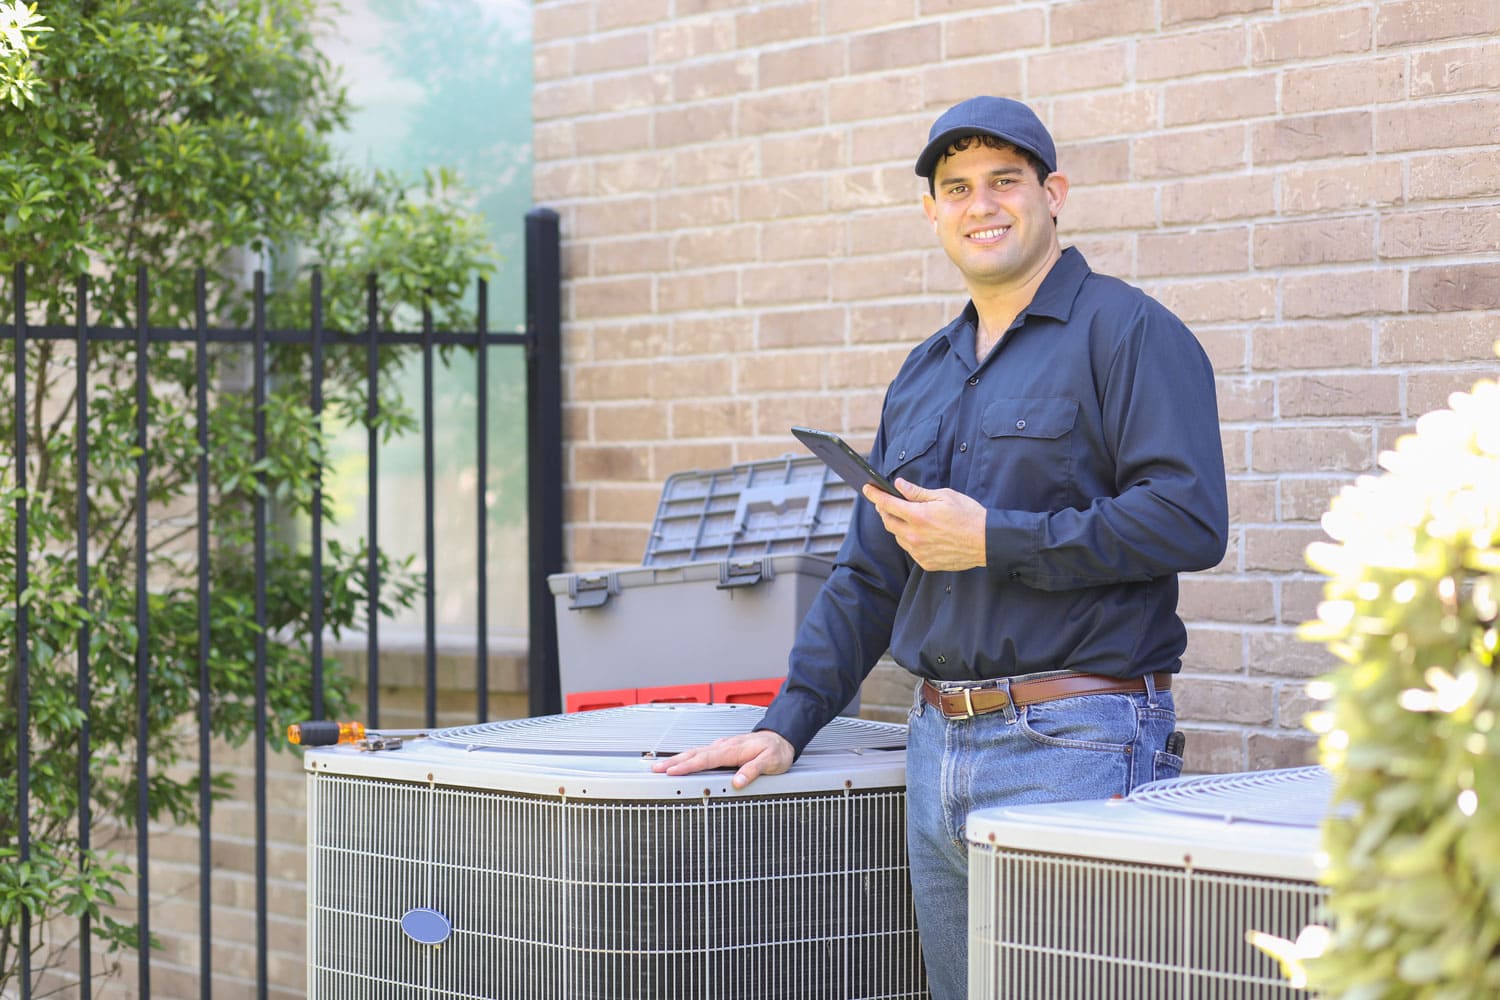 Latin descent, blue collar air conditioner repairman working at residential home.